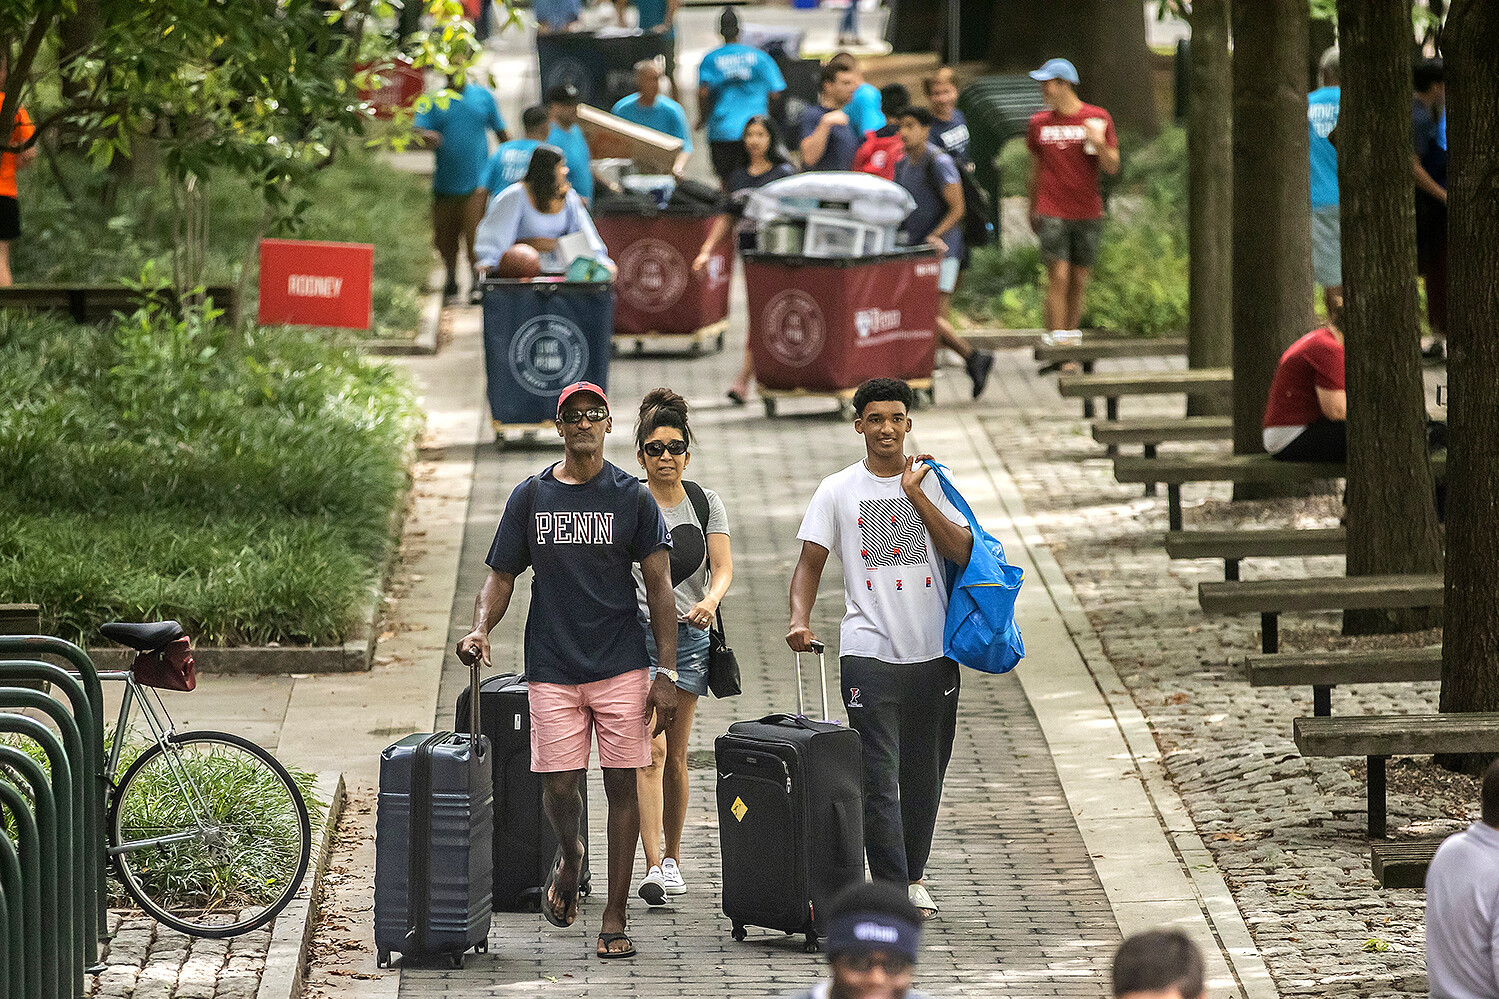 incoming first year students move into the quad